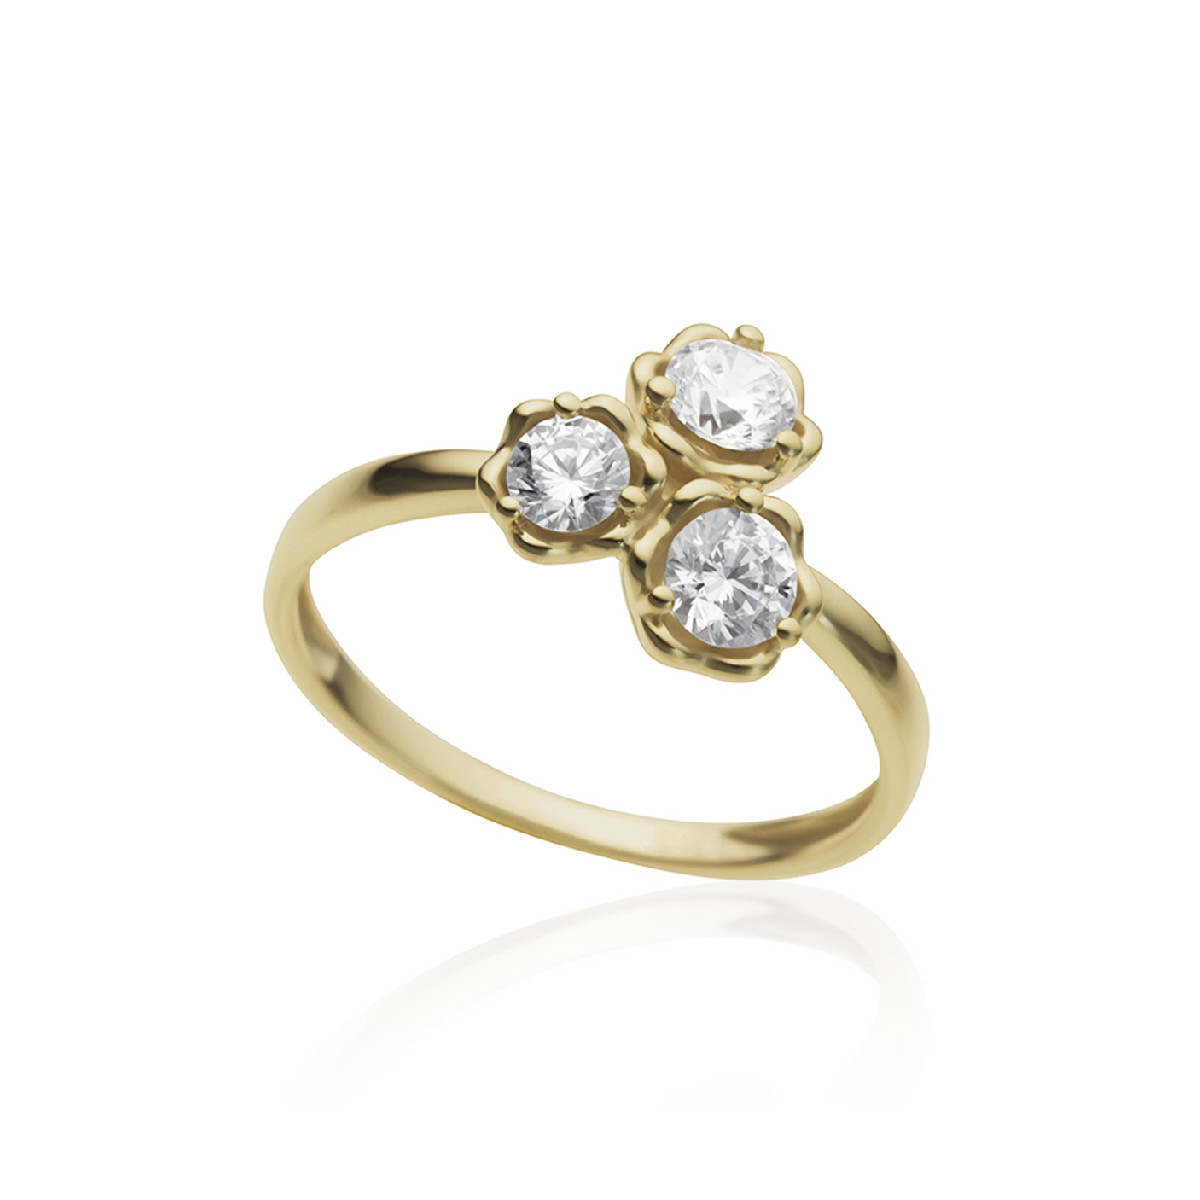 YELLOW GOLD AND ZIRCONIA TRIPLET RING